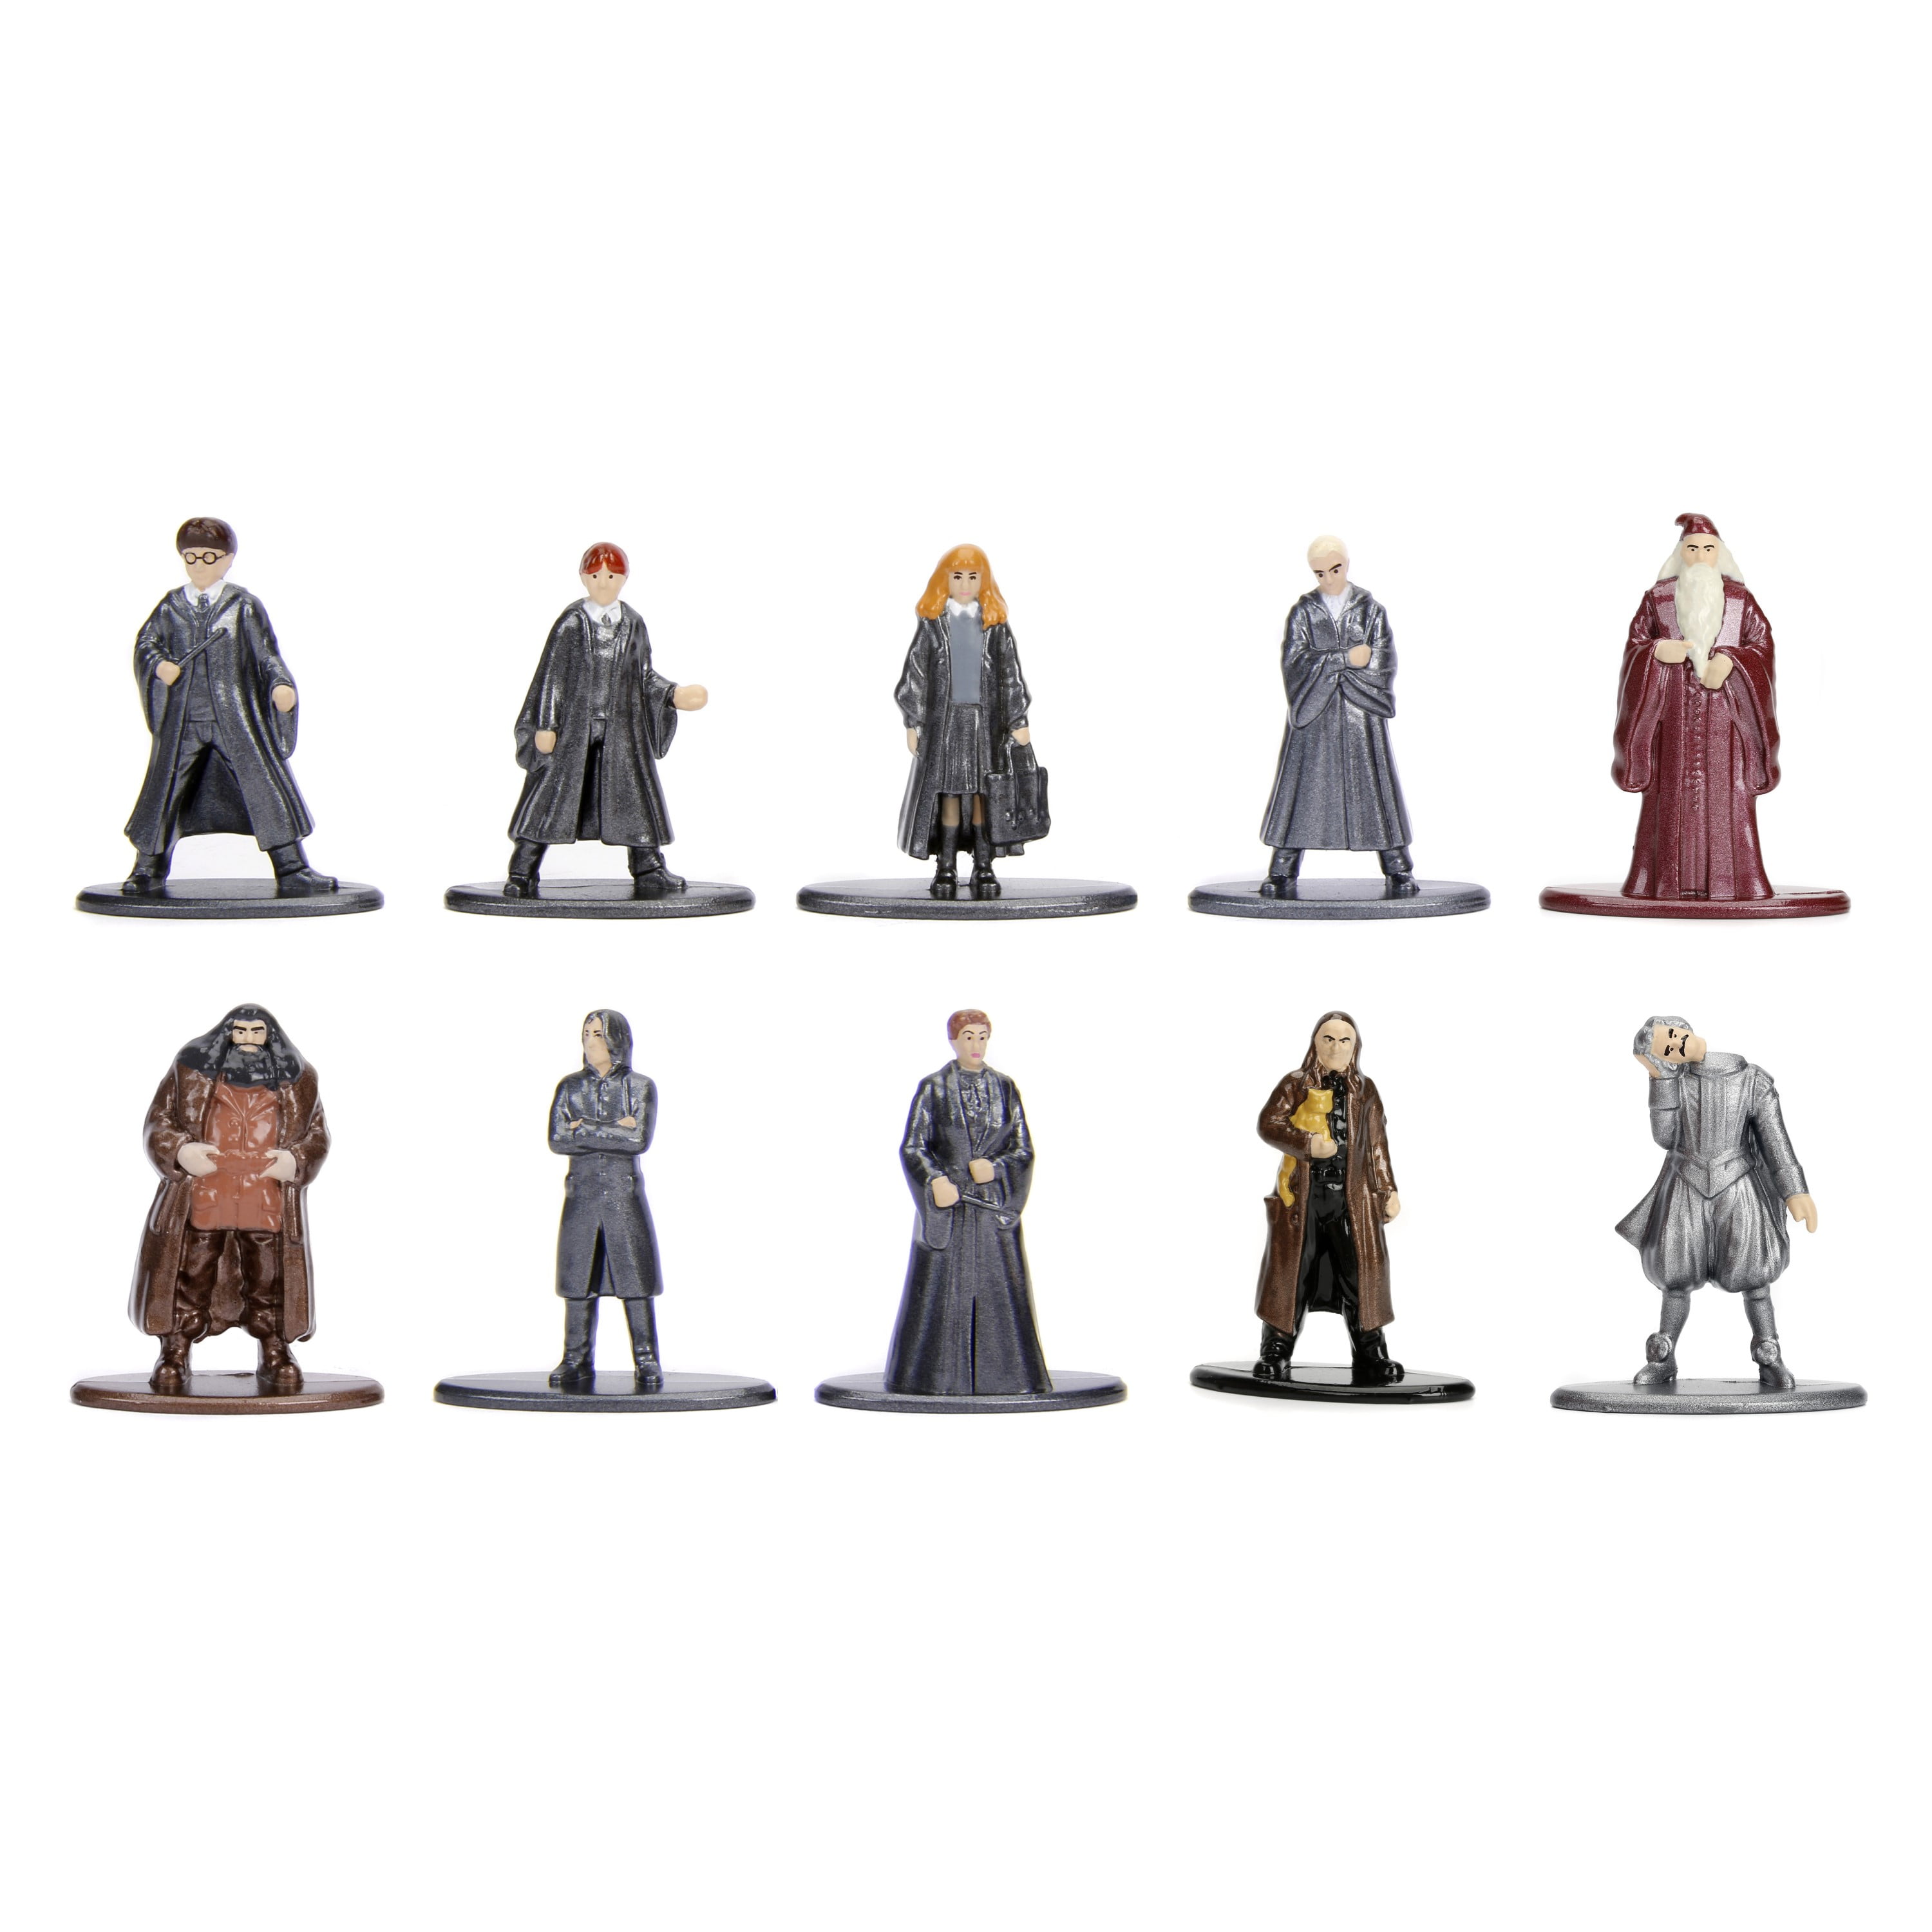 Details about   Nano Metalfigs Harry Potter Box Sets A & B 5 Figures in each box 